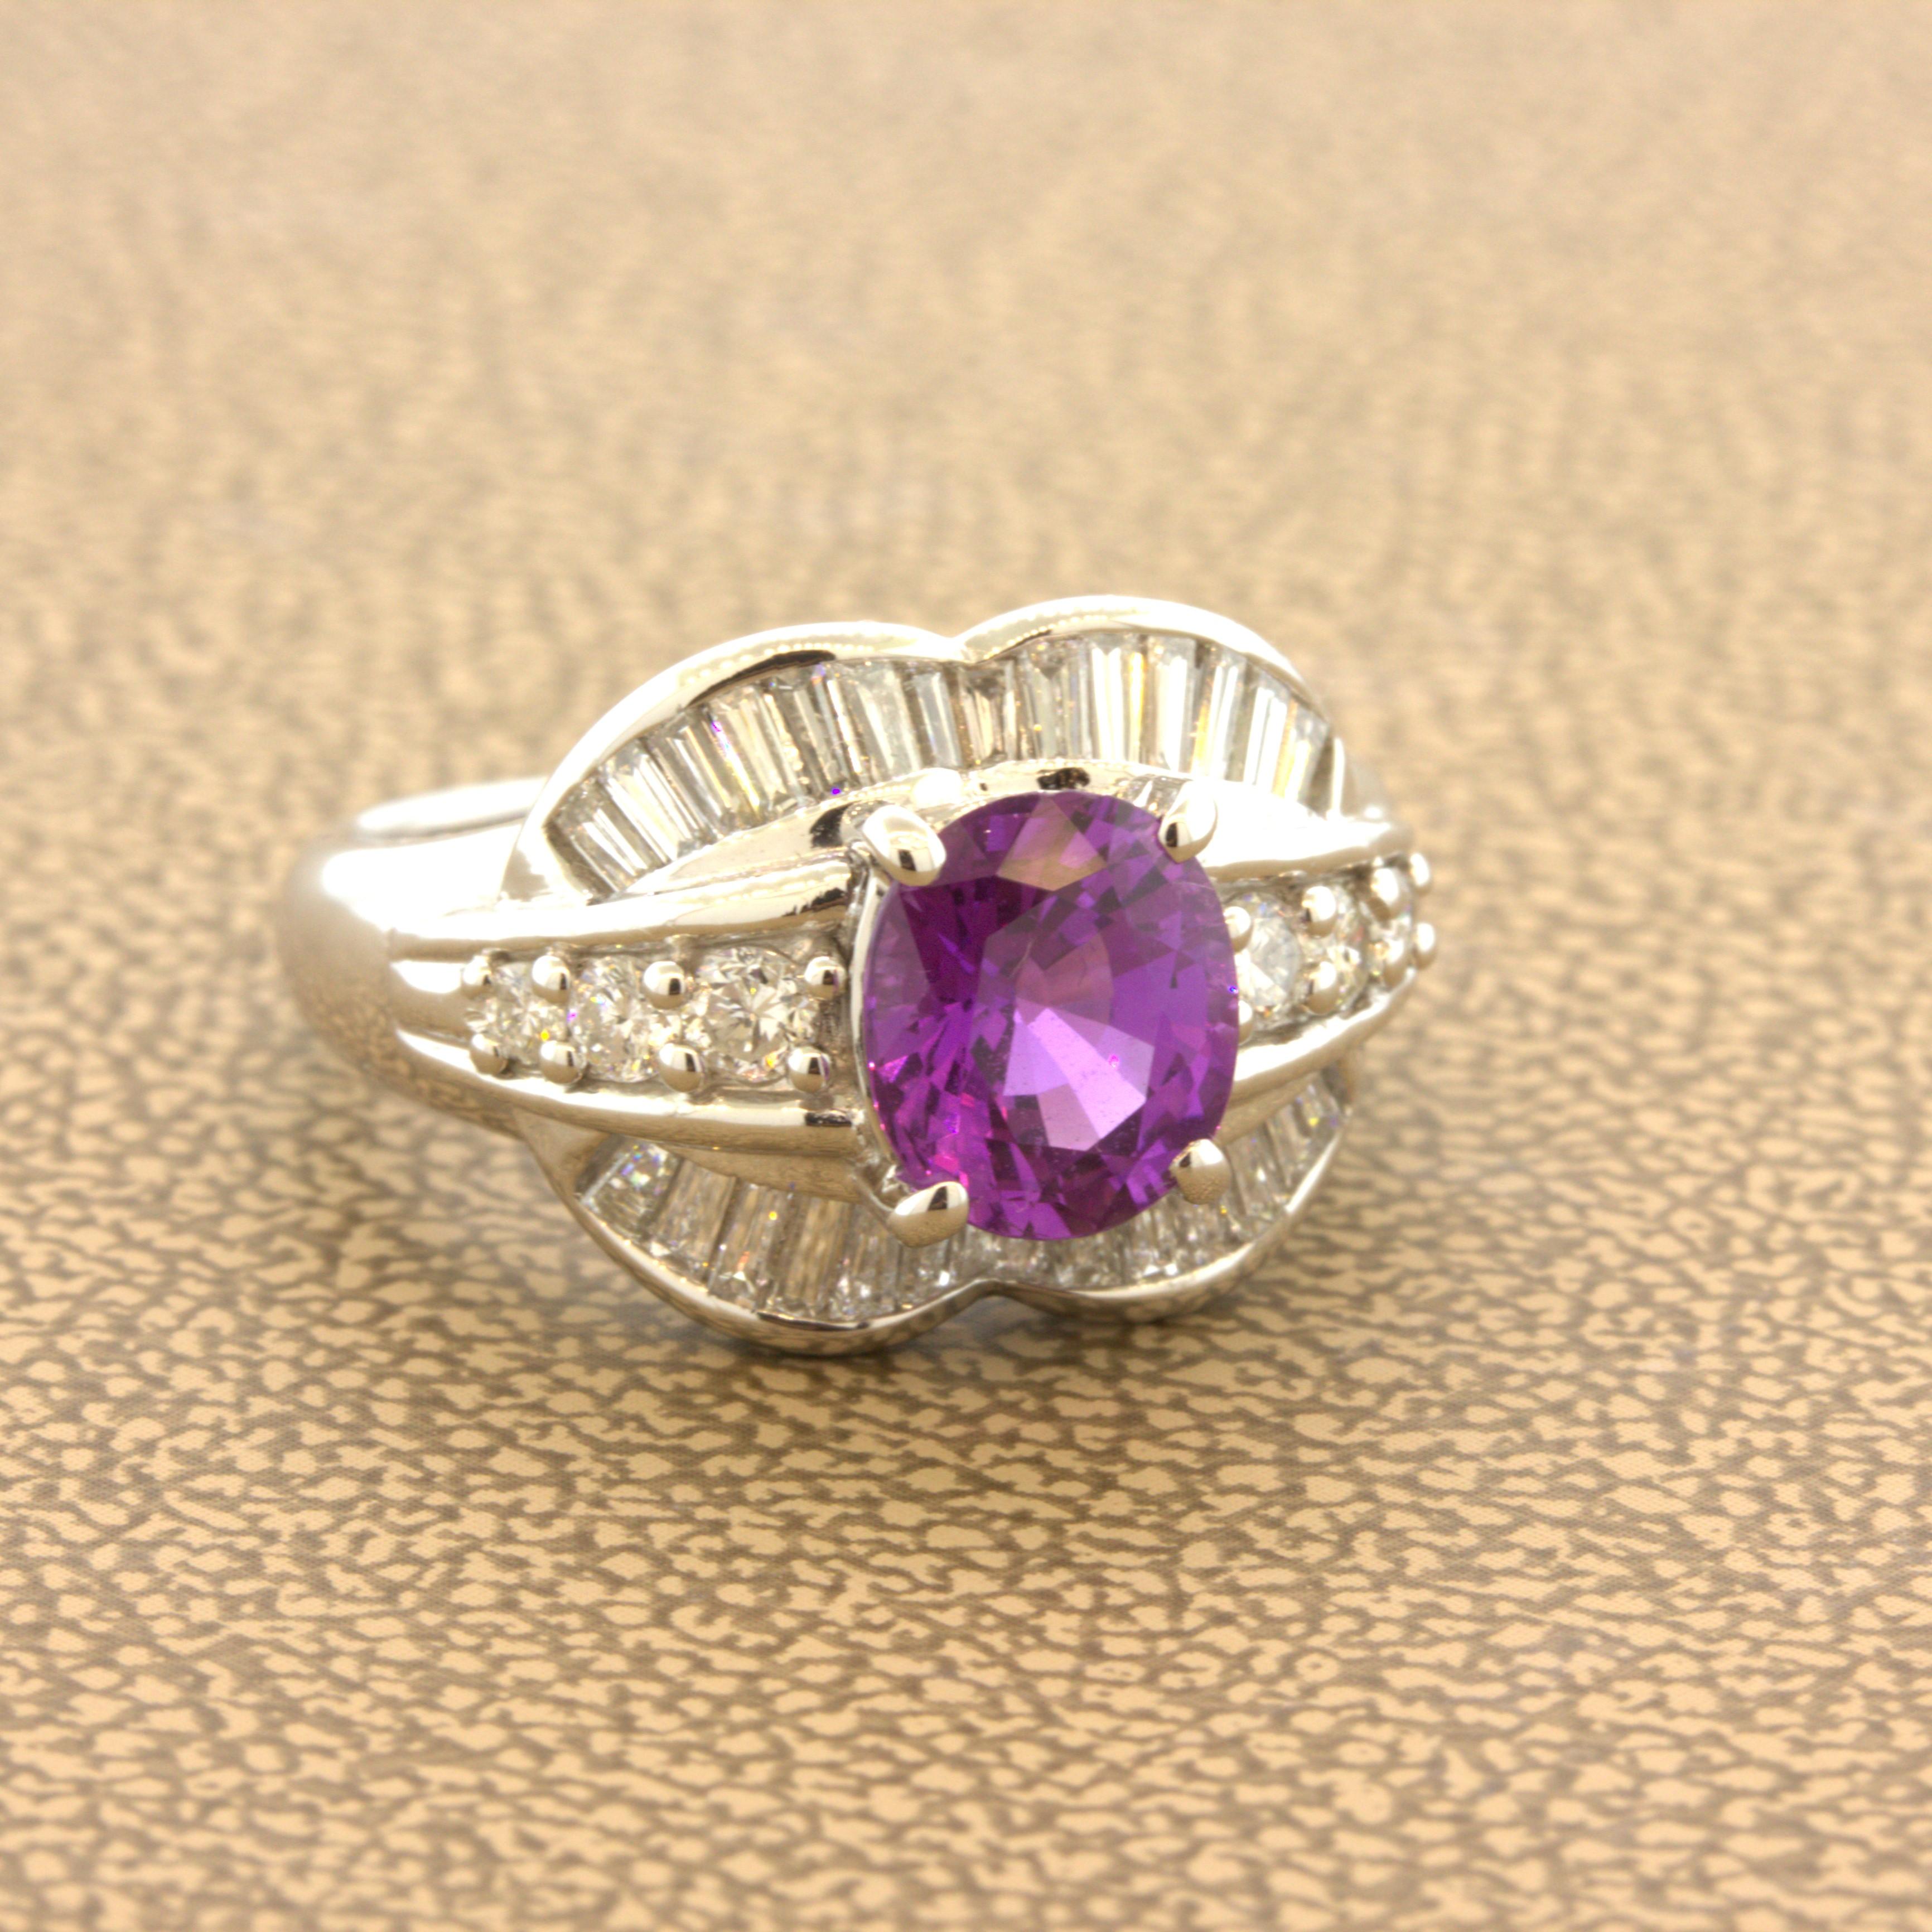 A rich intensely colored purple sapphire takes center stage. It weighs 1.83 carats and has a bright vivid purple color. It has a lovely oval shape that scintillates in the light with excellent light return. Adding to that, it is certified by the GIA